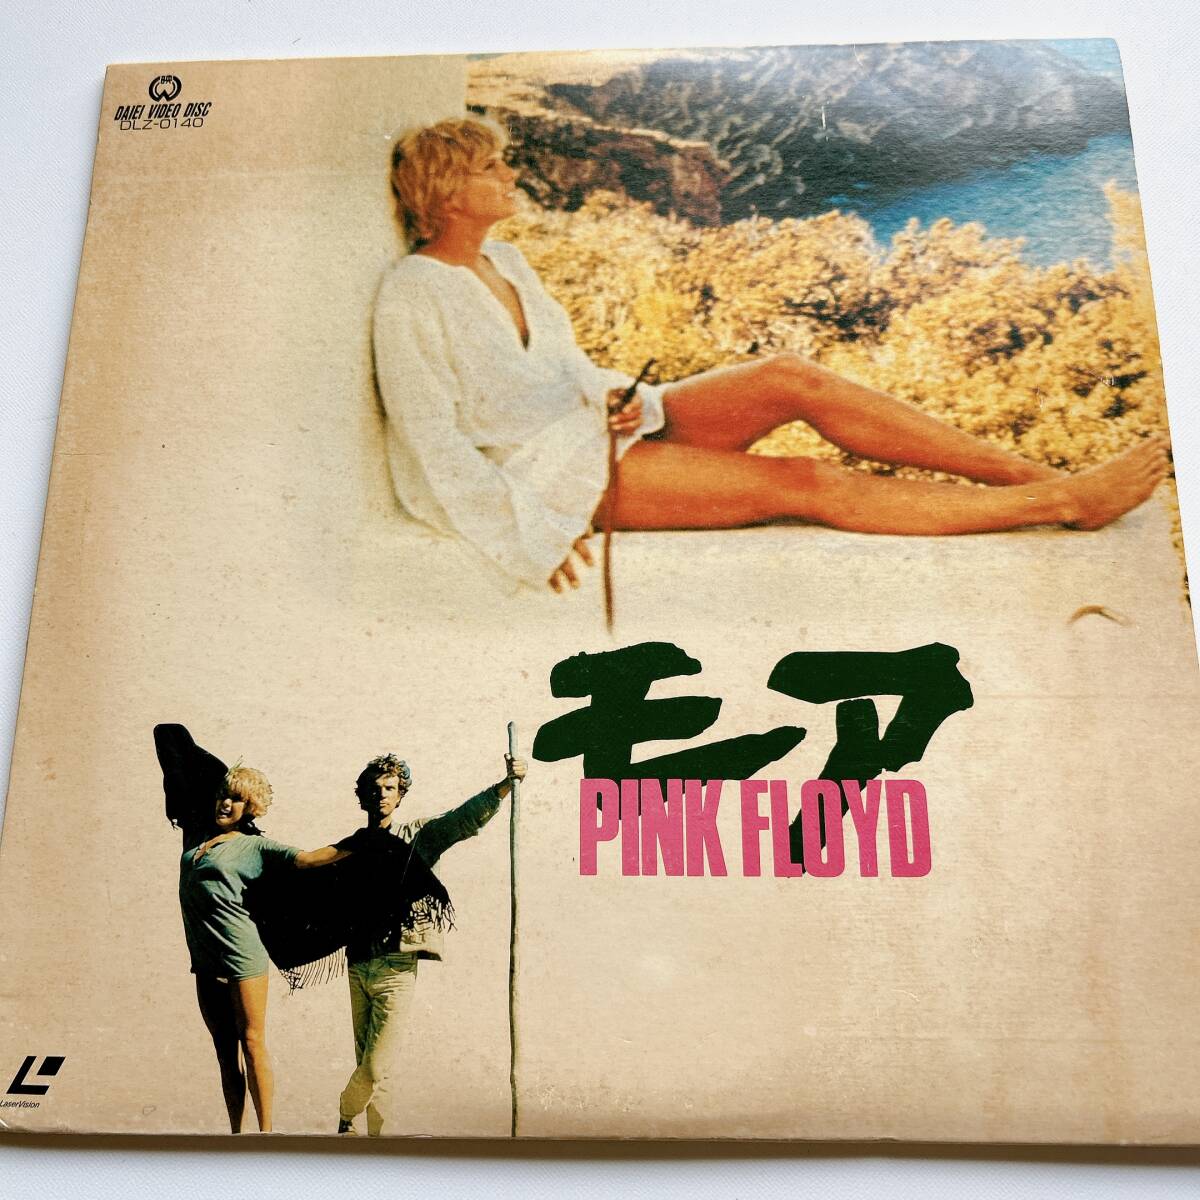 1 jpy used LD moa PINK FROYD pink floyd 1970 music responsible pink floyd laser disk disk 3